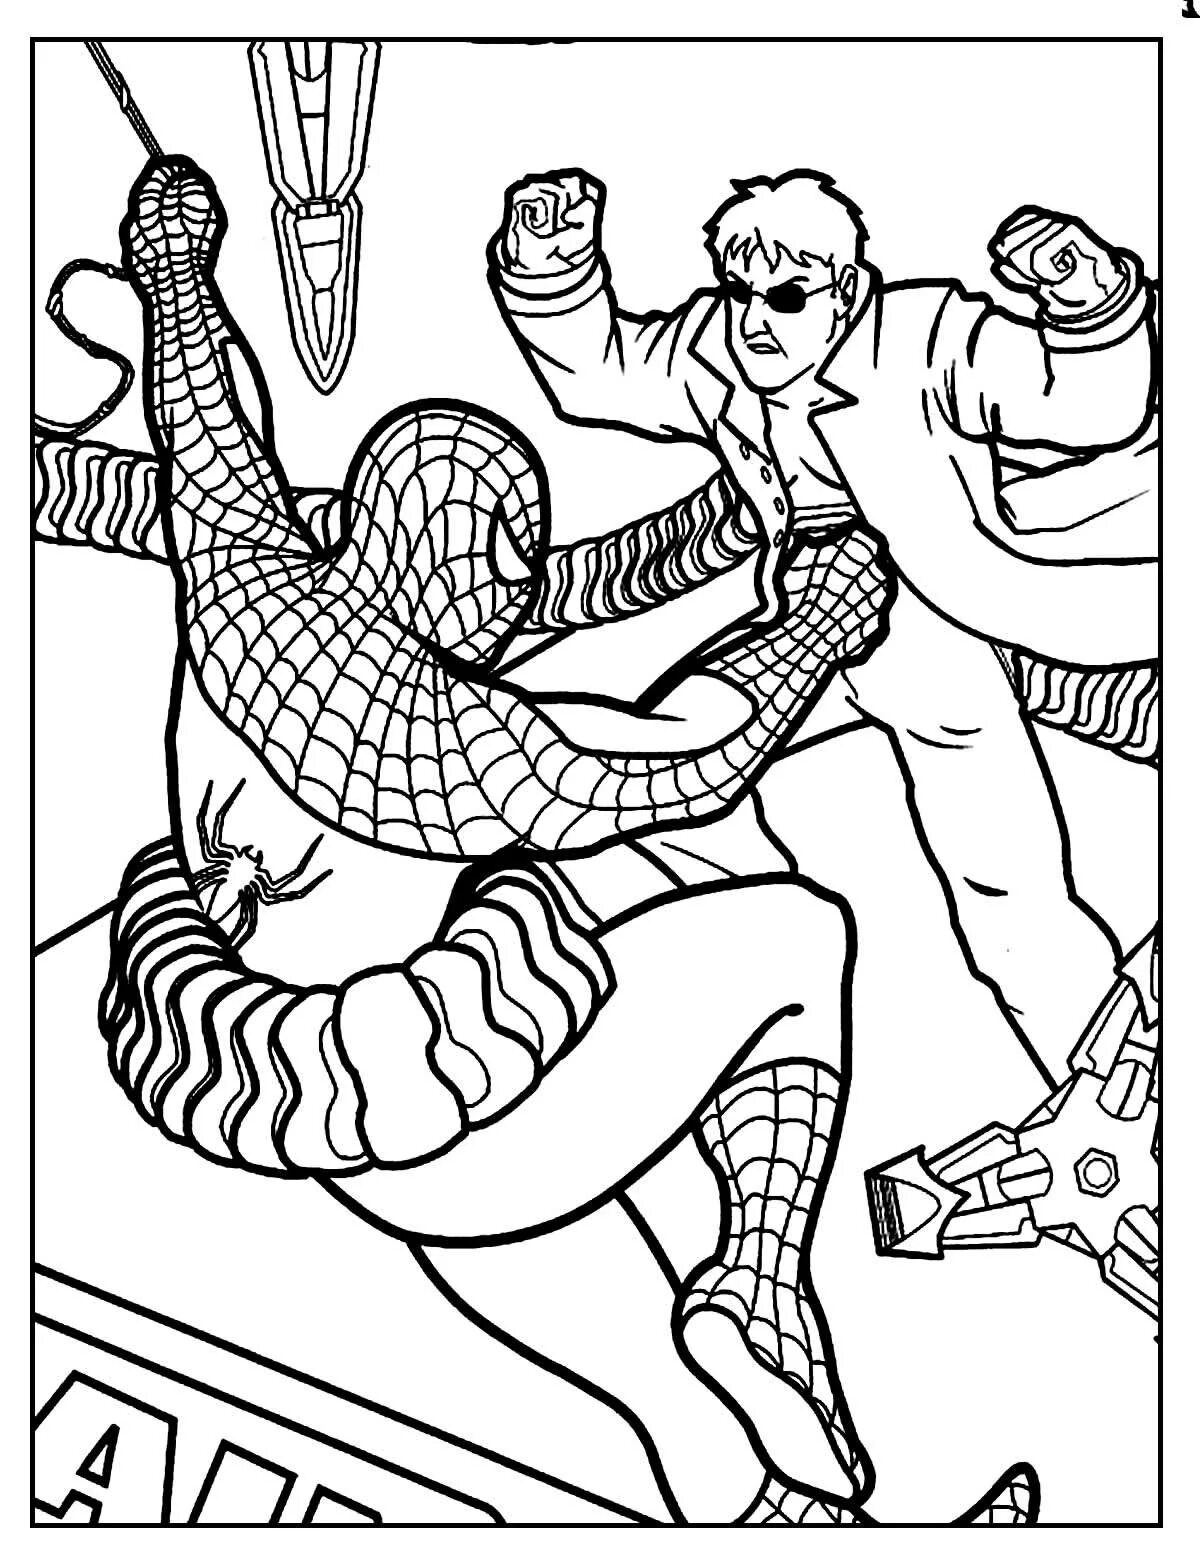 Spiderman's Spectacular Christmas Coloring Page